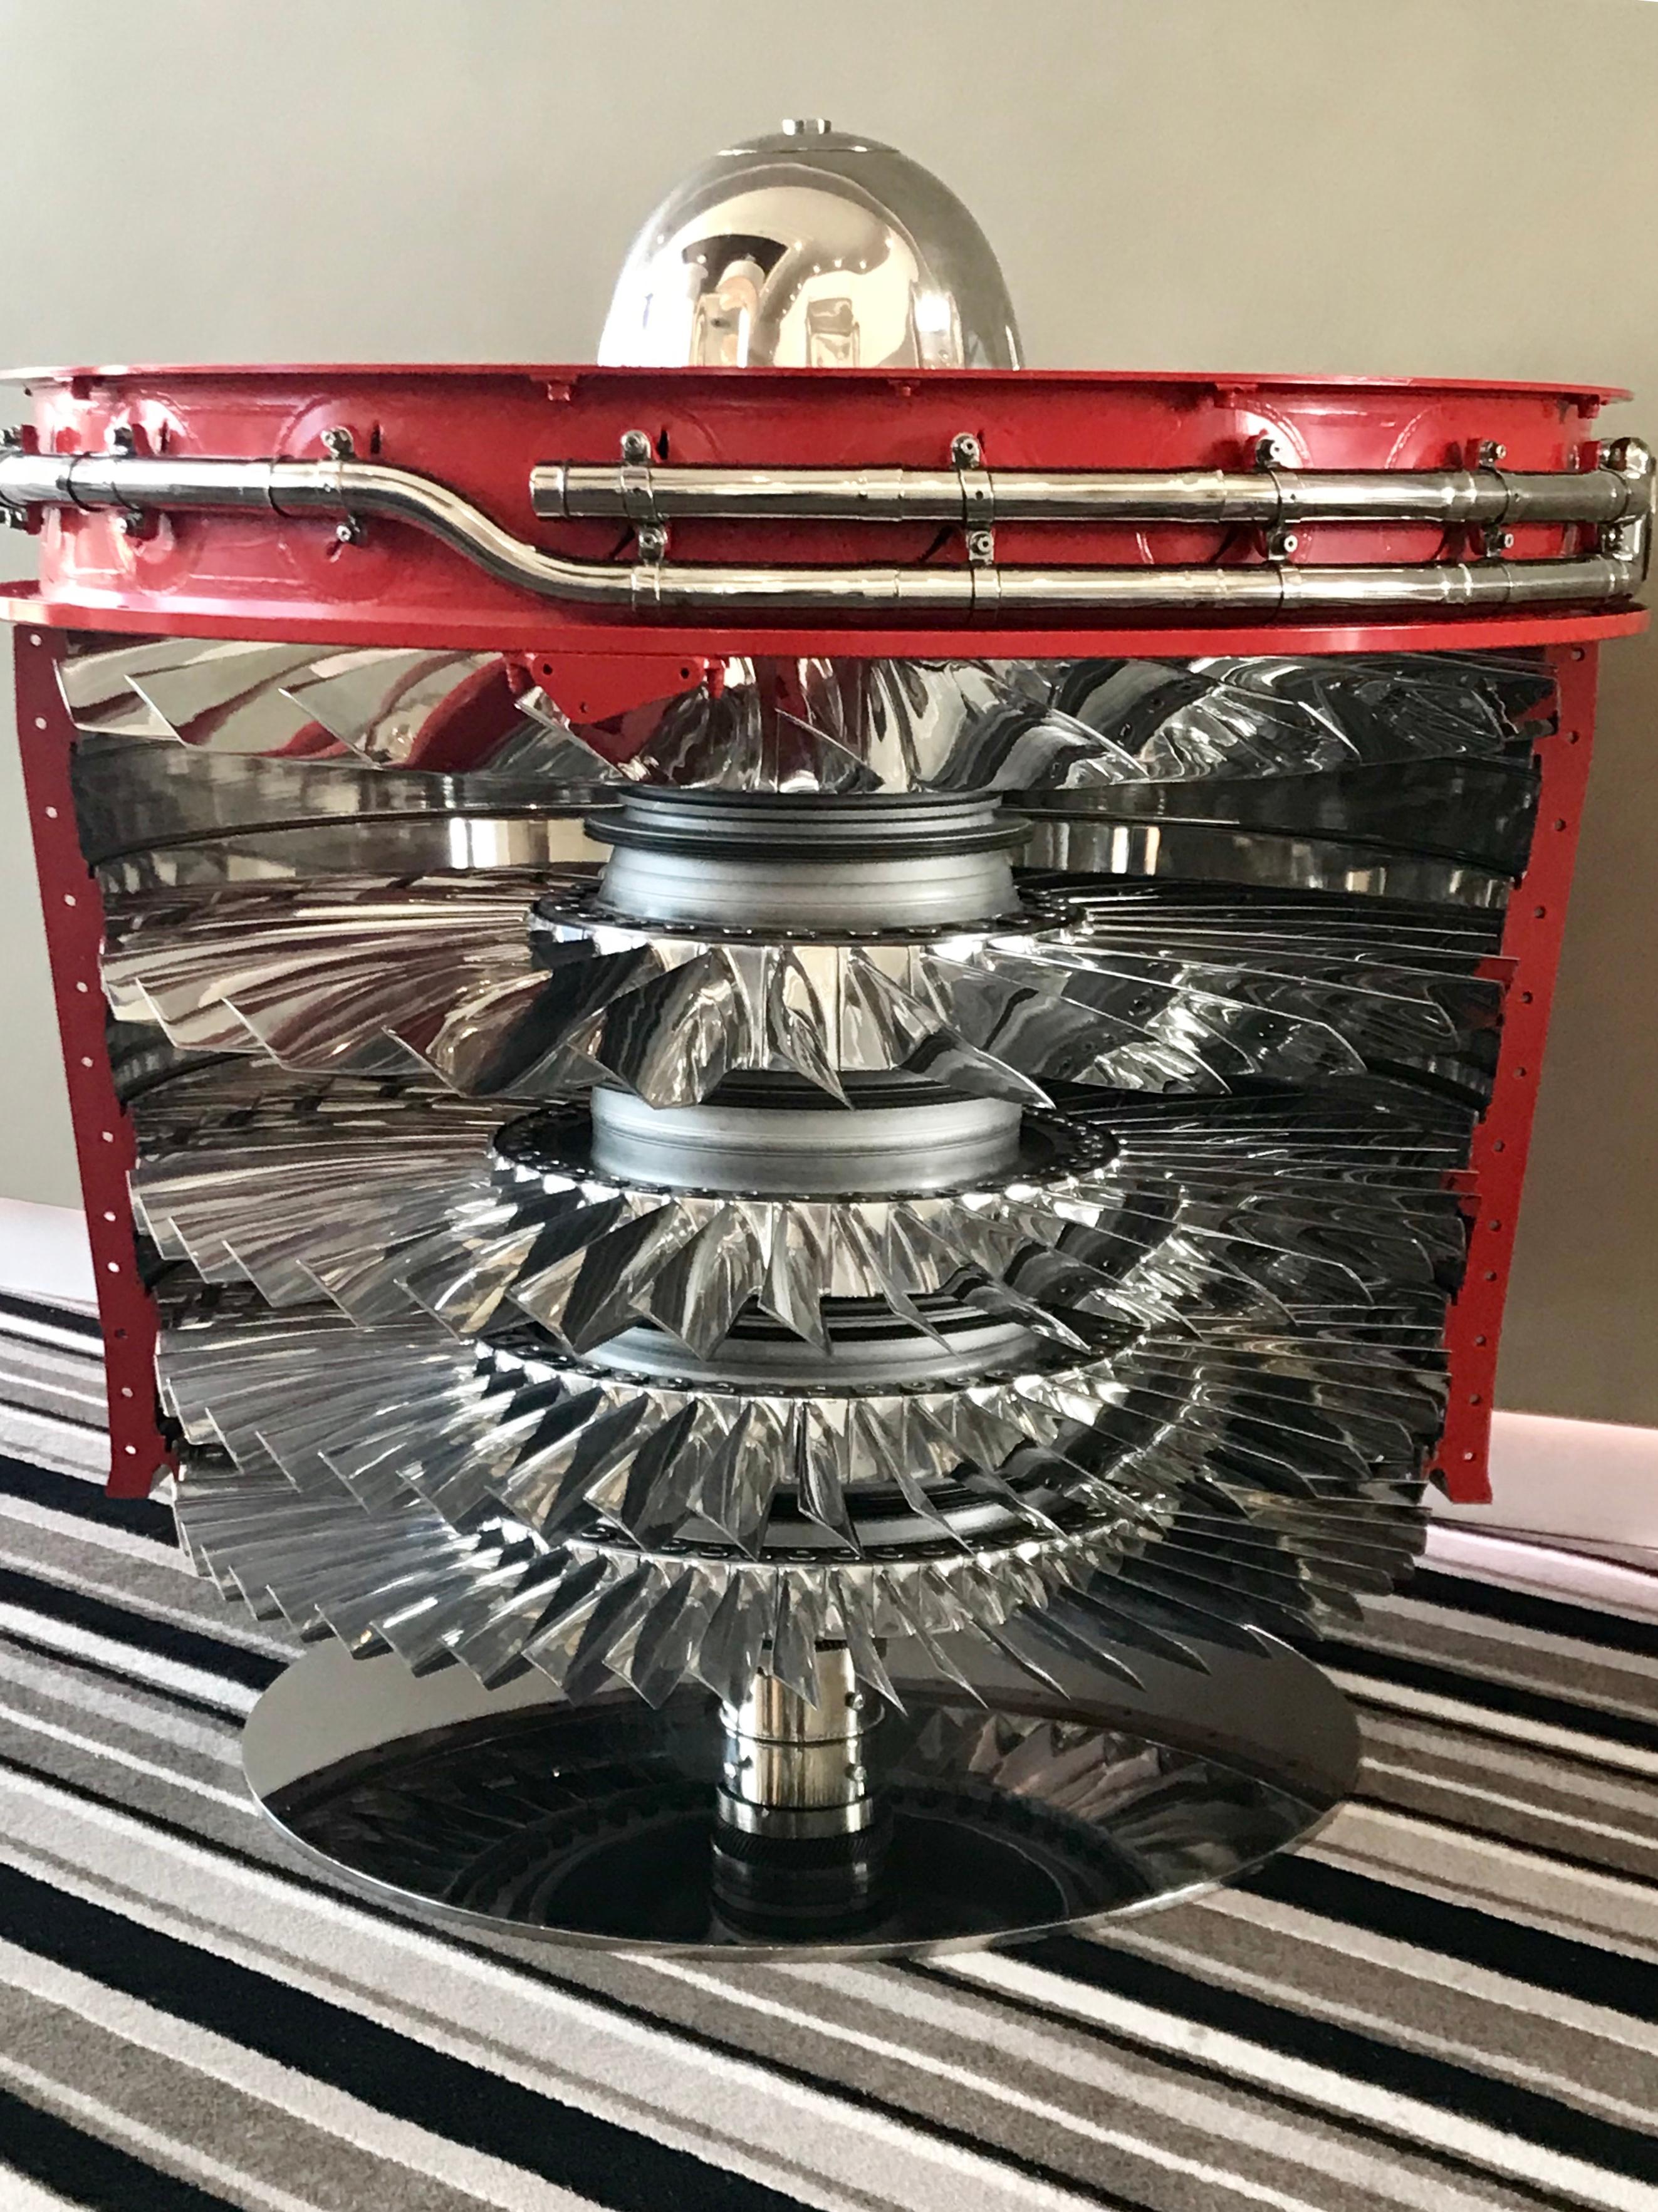 The epitome of style and elegance, Rolls Royce genuine assembly parts are at the heart of this stunning object. 179 individually highly polished blades set within its original outer casing form part of this stunning centre table.

Please note the